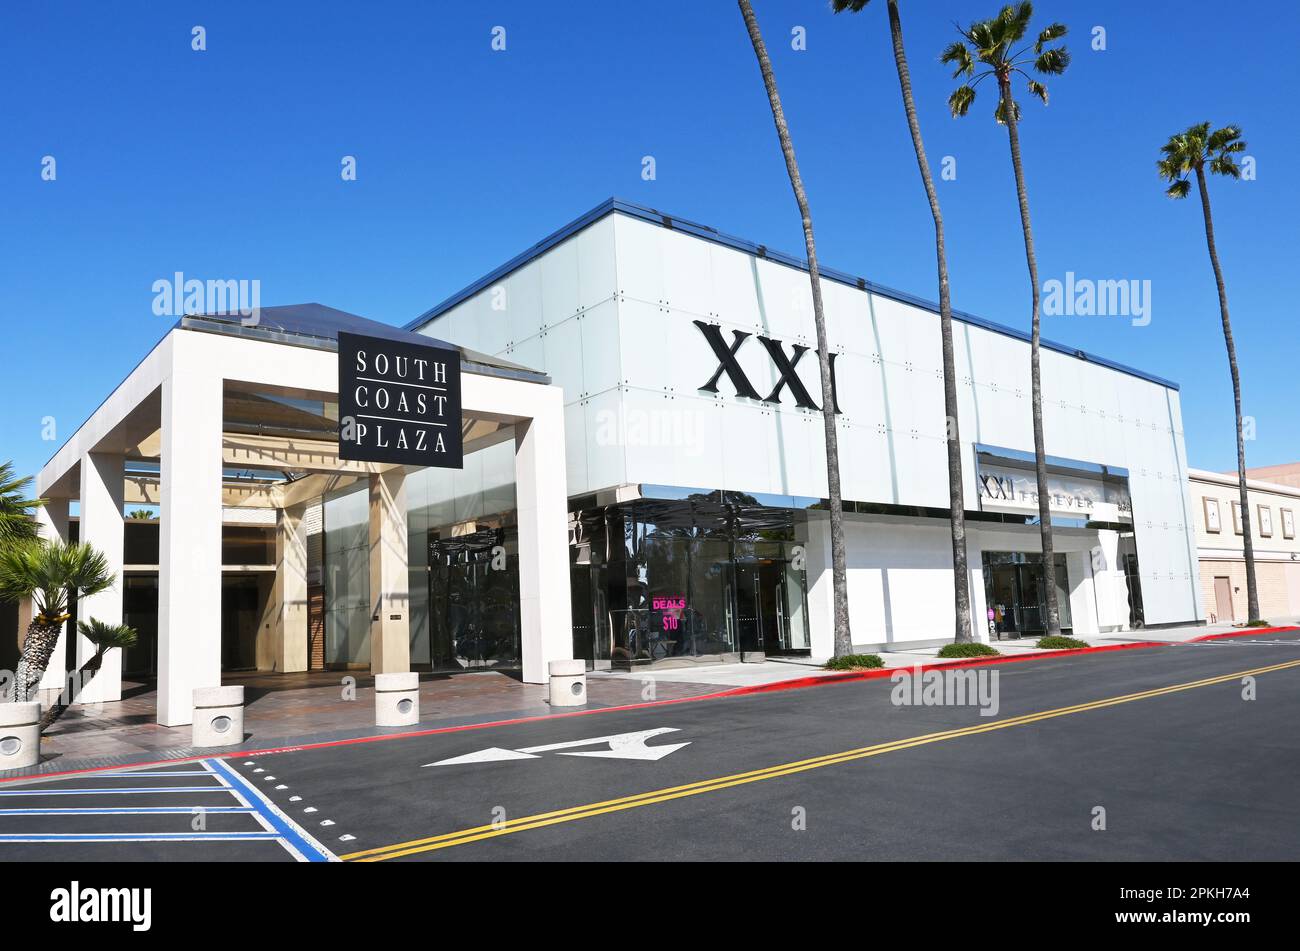 Photos: Chanel's Revamped South Coast Plaza Store Goes Under the Sea -  Racked LA